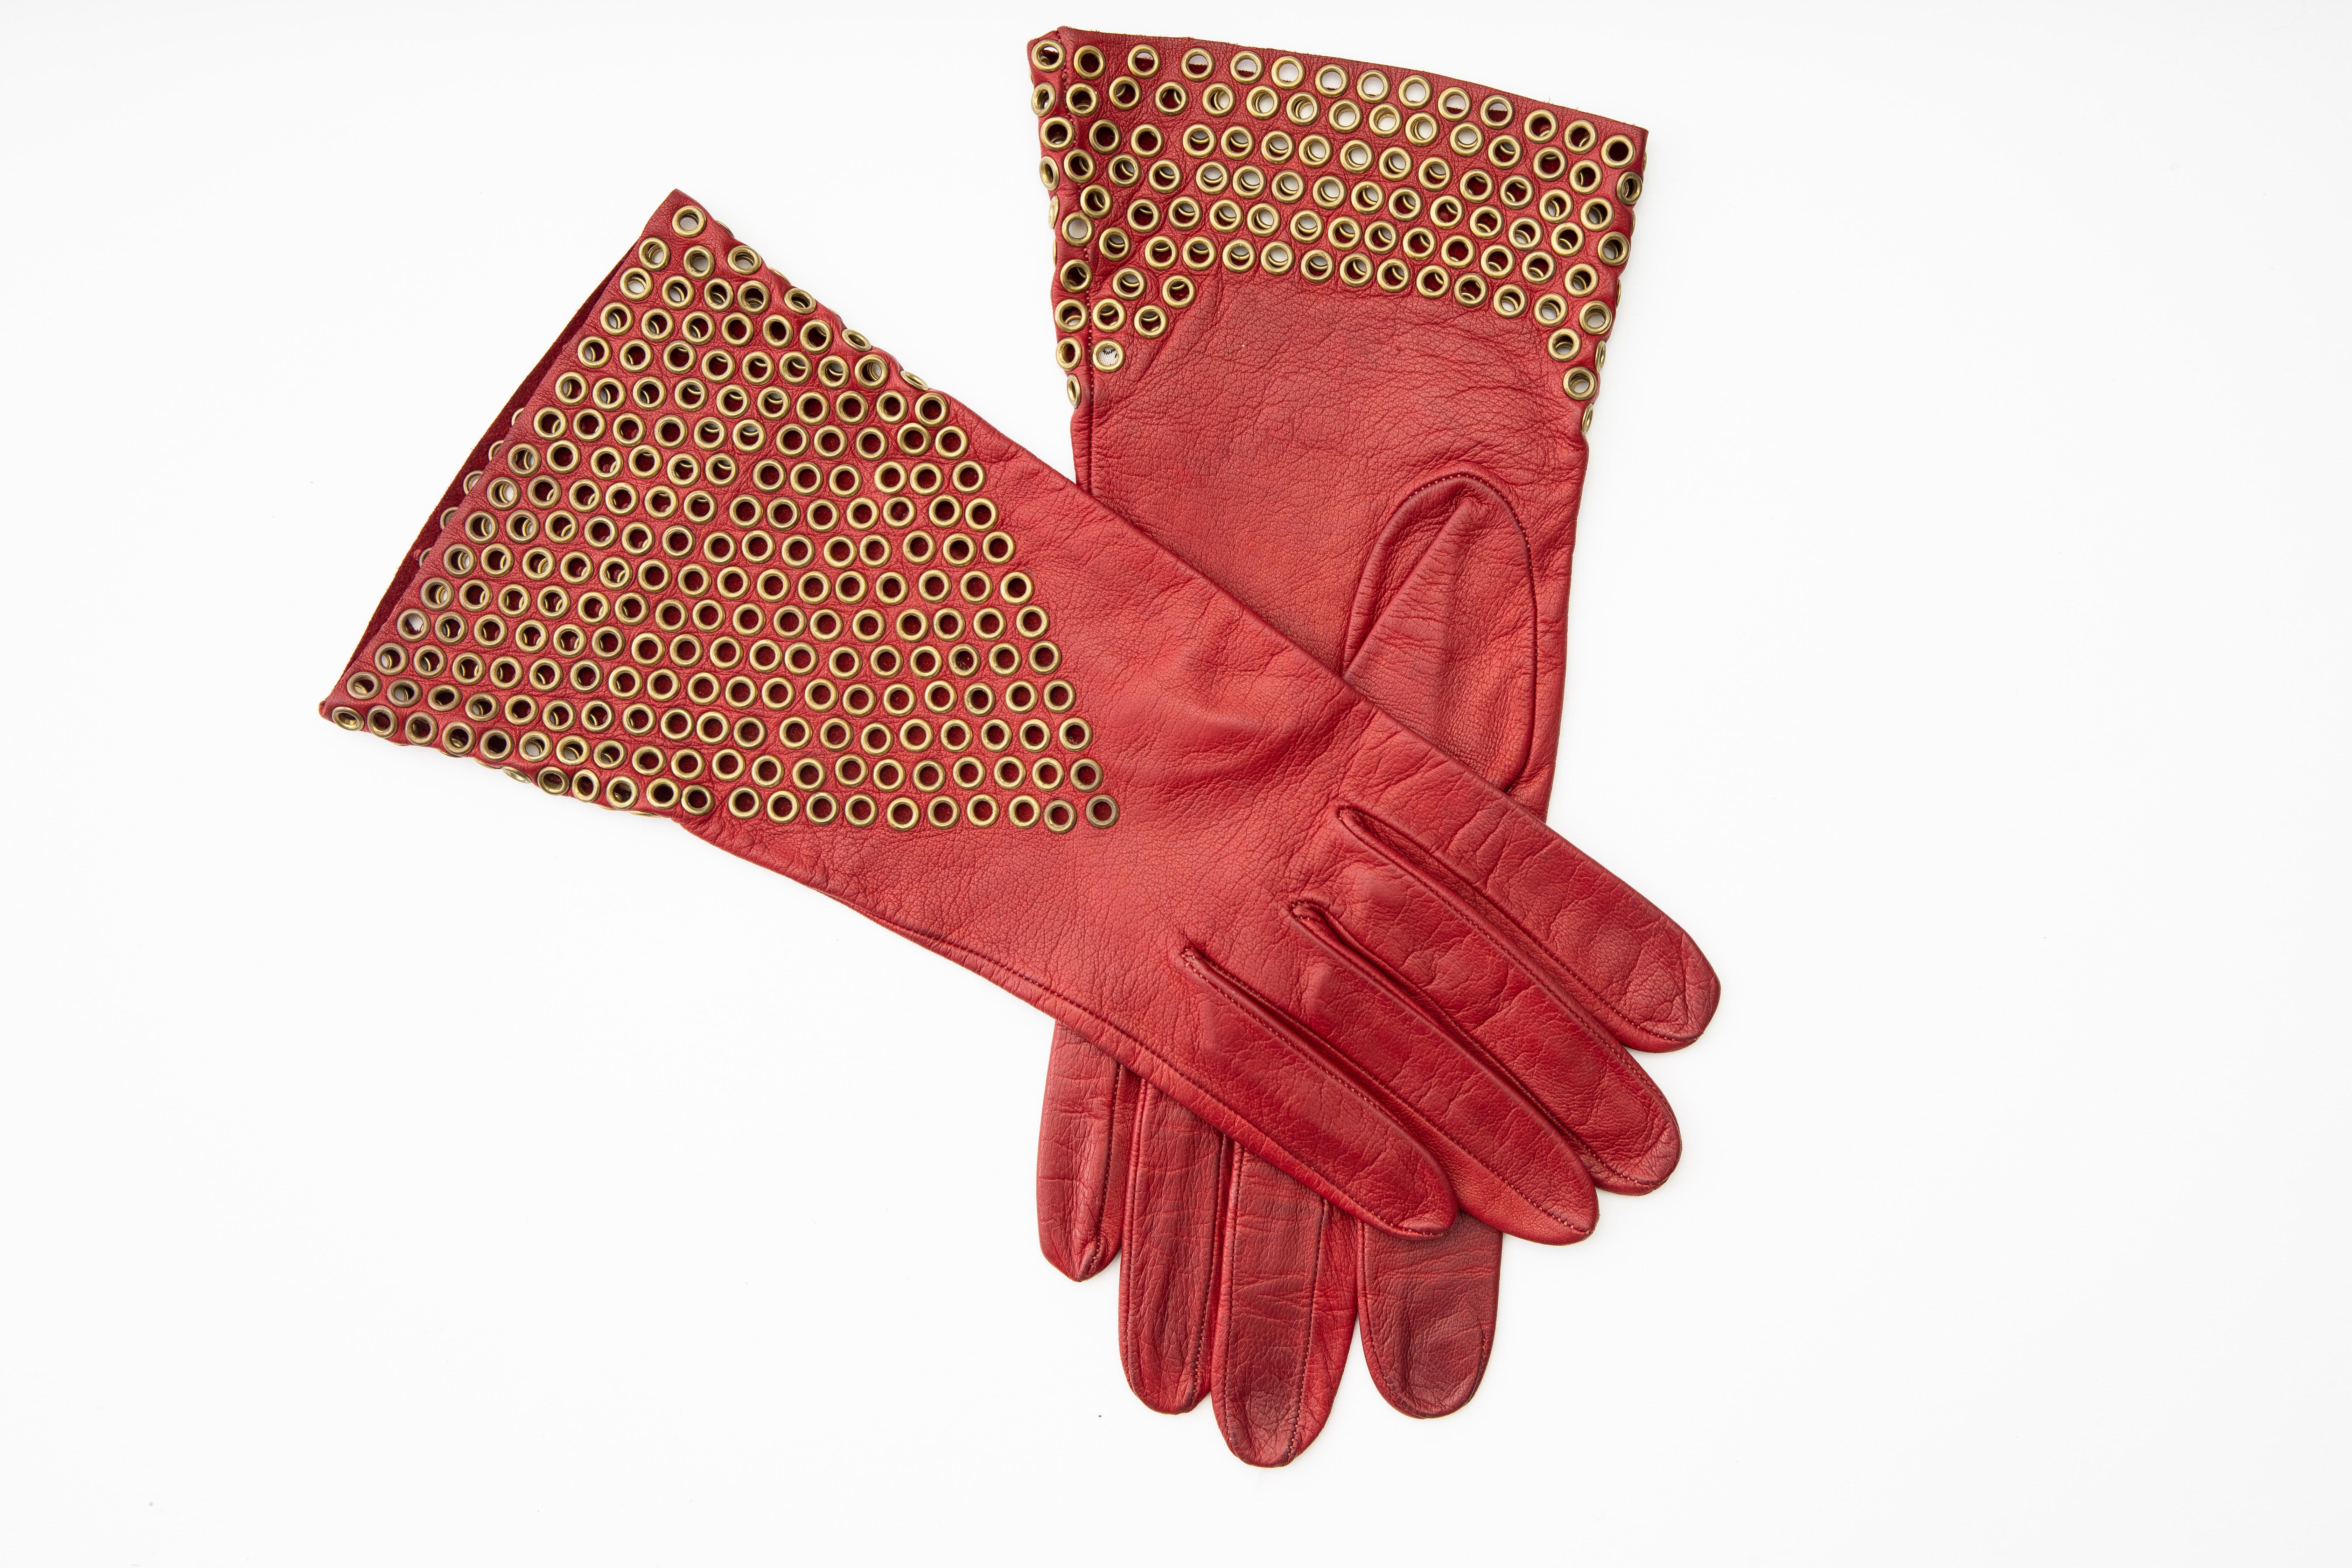 Azzedine Alaia Oxblood Leather Bronze Appliquéd Grommets Gloves, Circa: 1980's In Good Condition For Sale In Cincinnati, OH